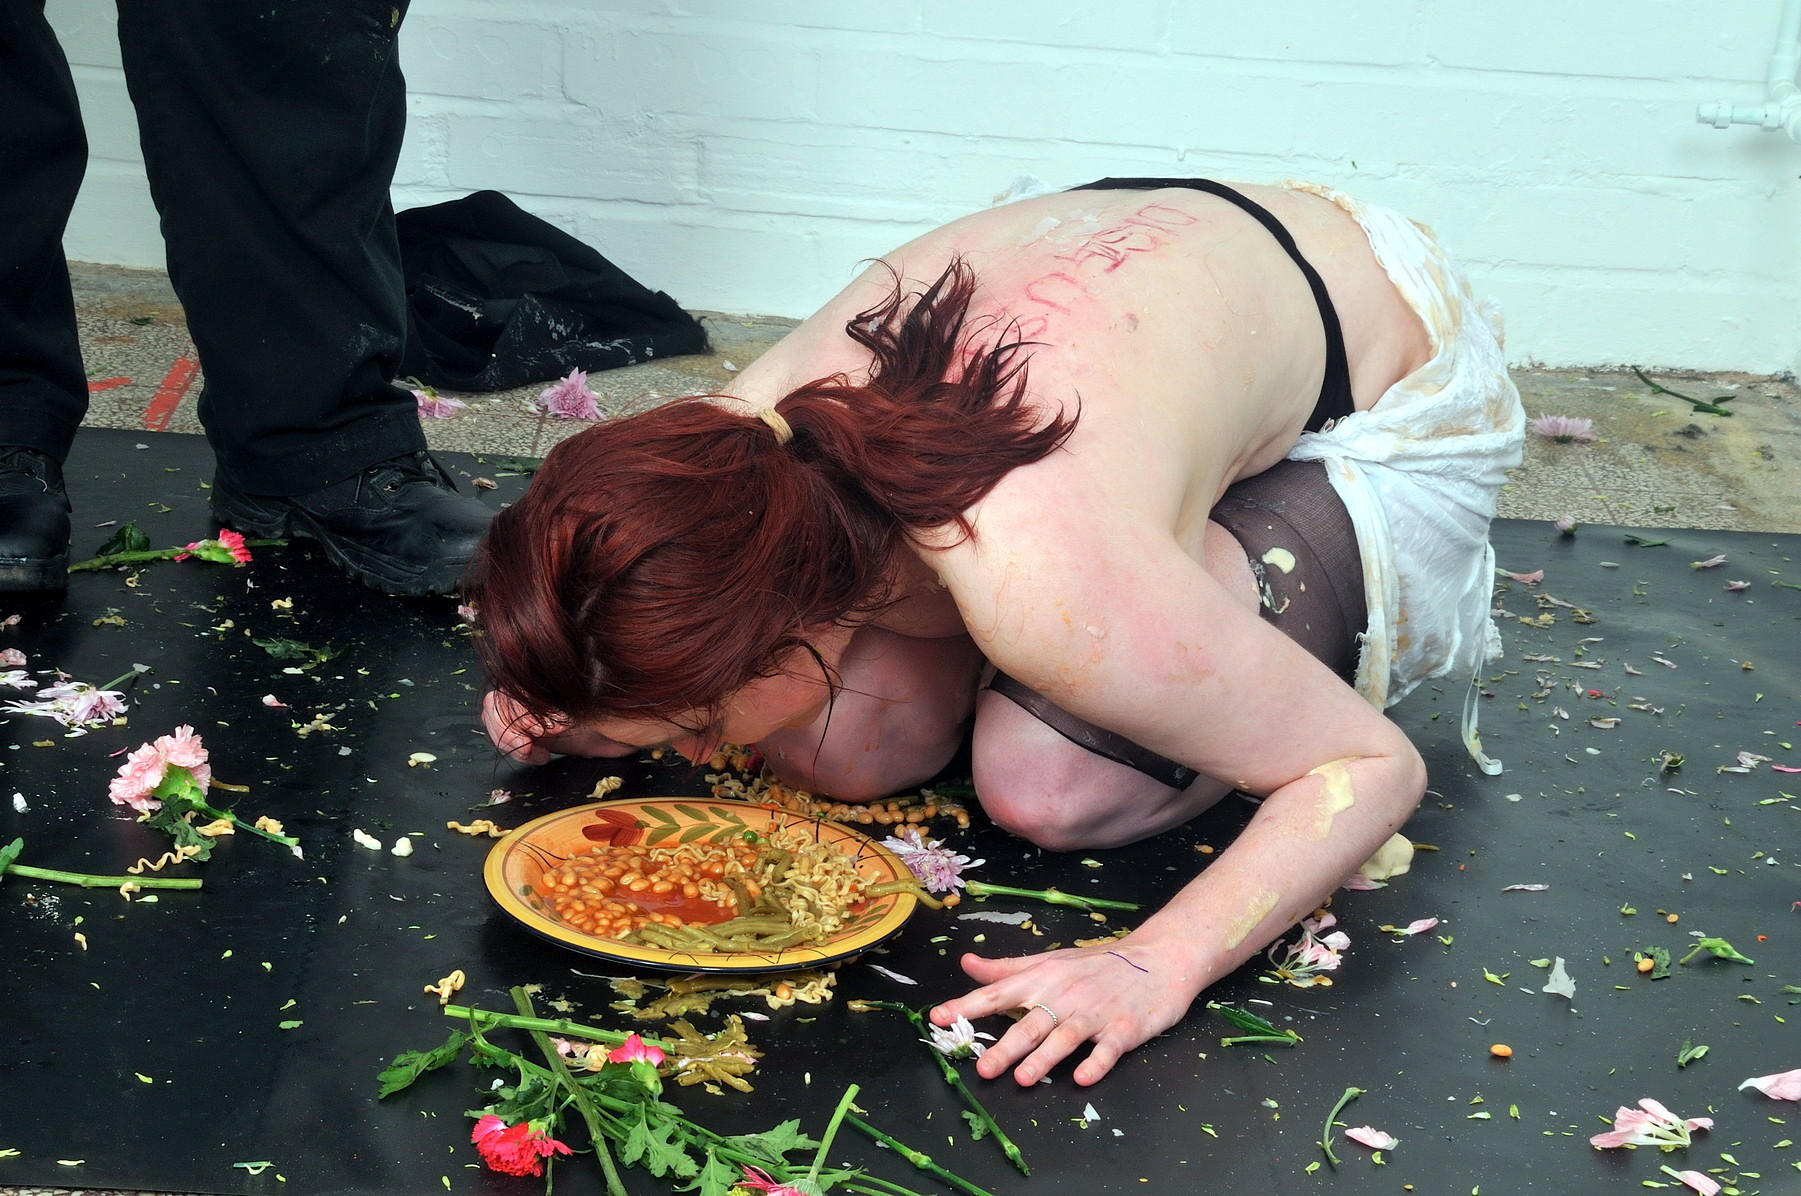 Messy slave Sachas humiliation and insane food domination of redhead slut in ext #71936122